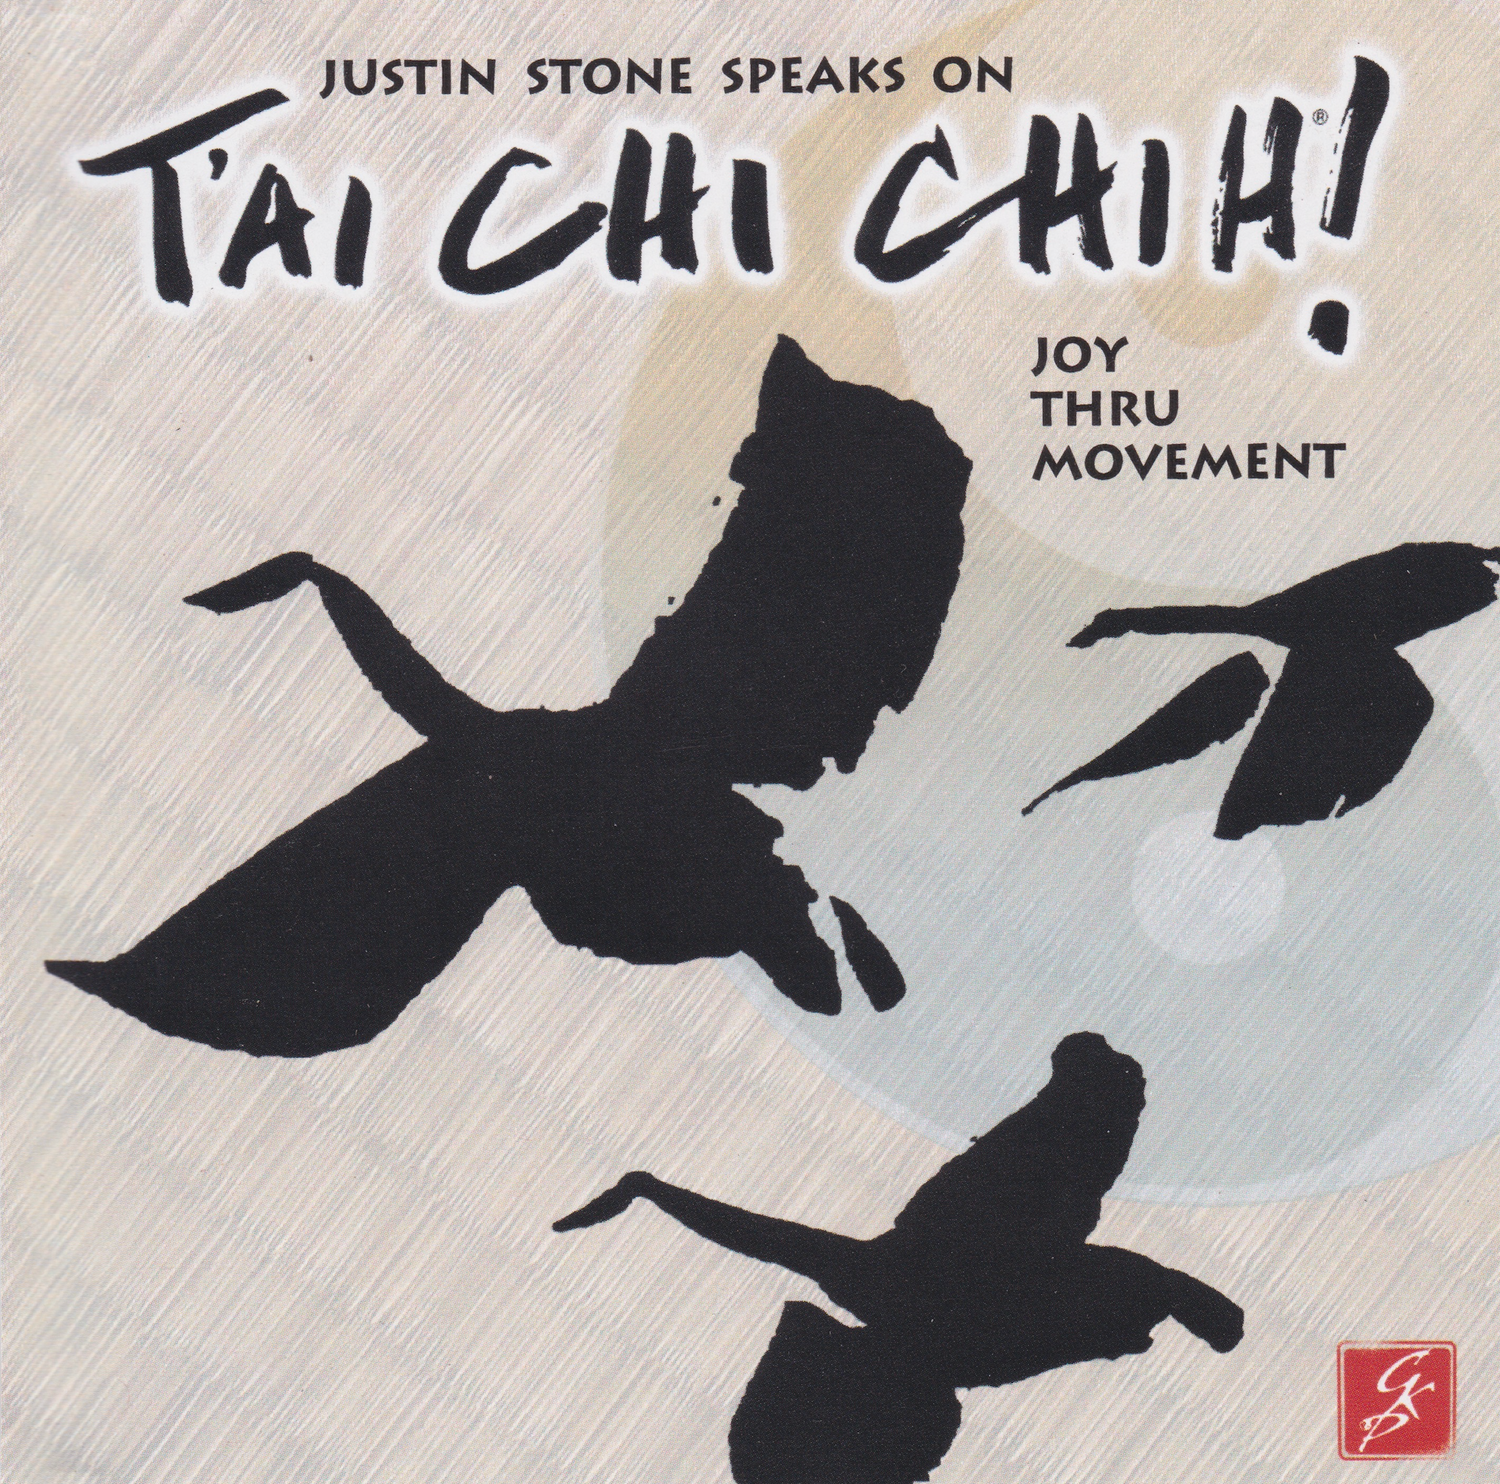 Tai Chi Chih Joy Through Movement CD by Justin Stone (Preowned)